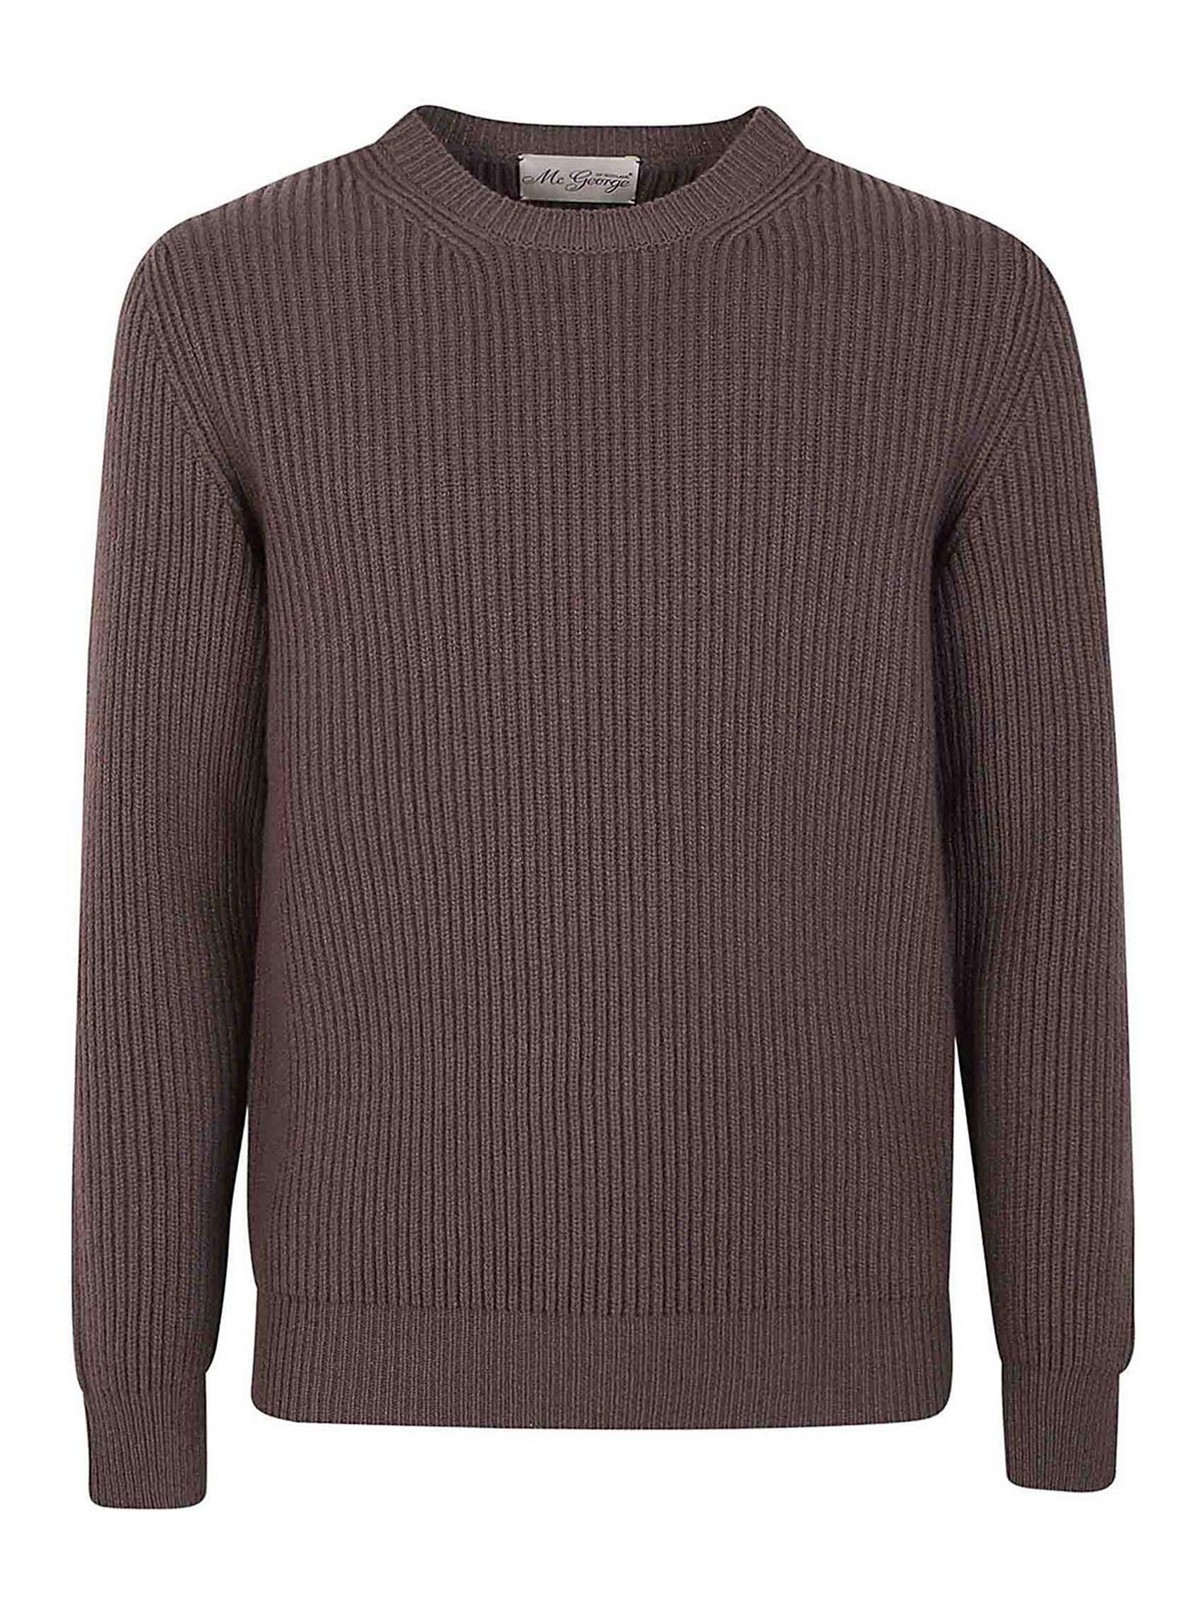 Shop Mcgeorge Of Scotland Crew Neck Sweater In Brown